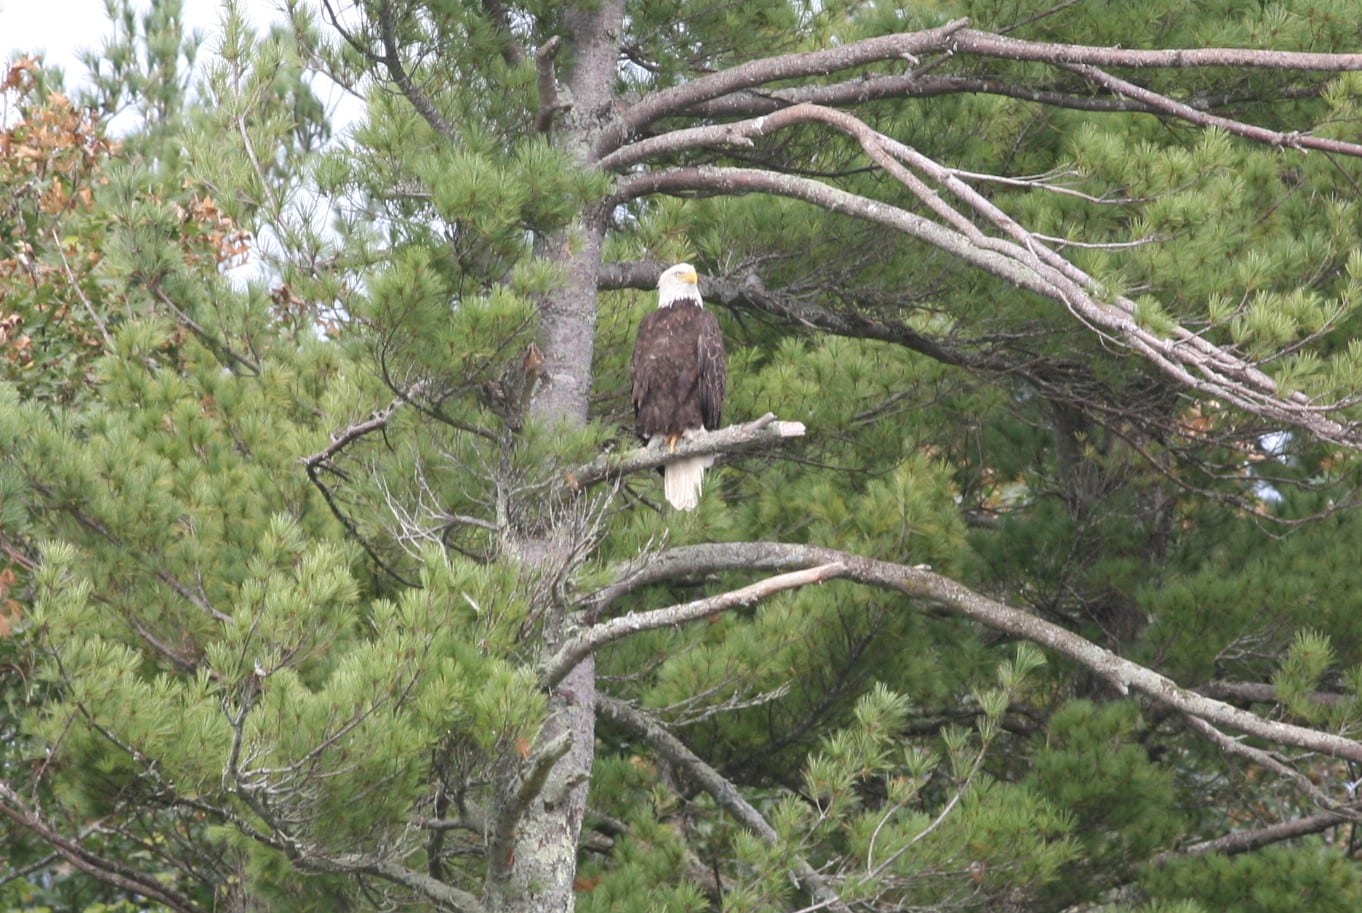 An adult Bald Eagle perched on a pine tree